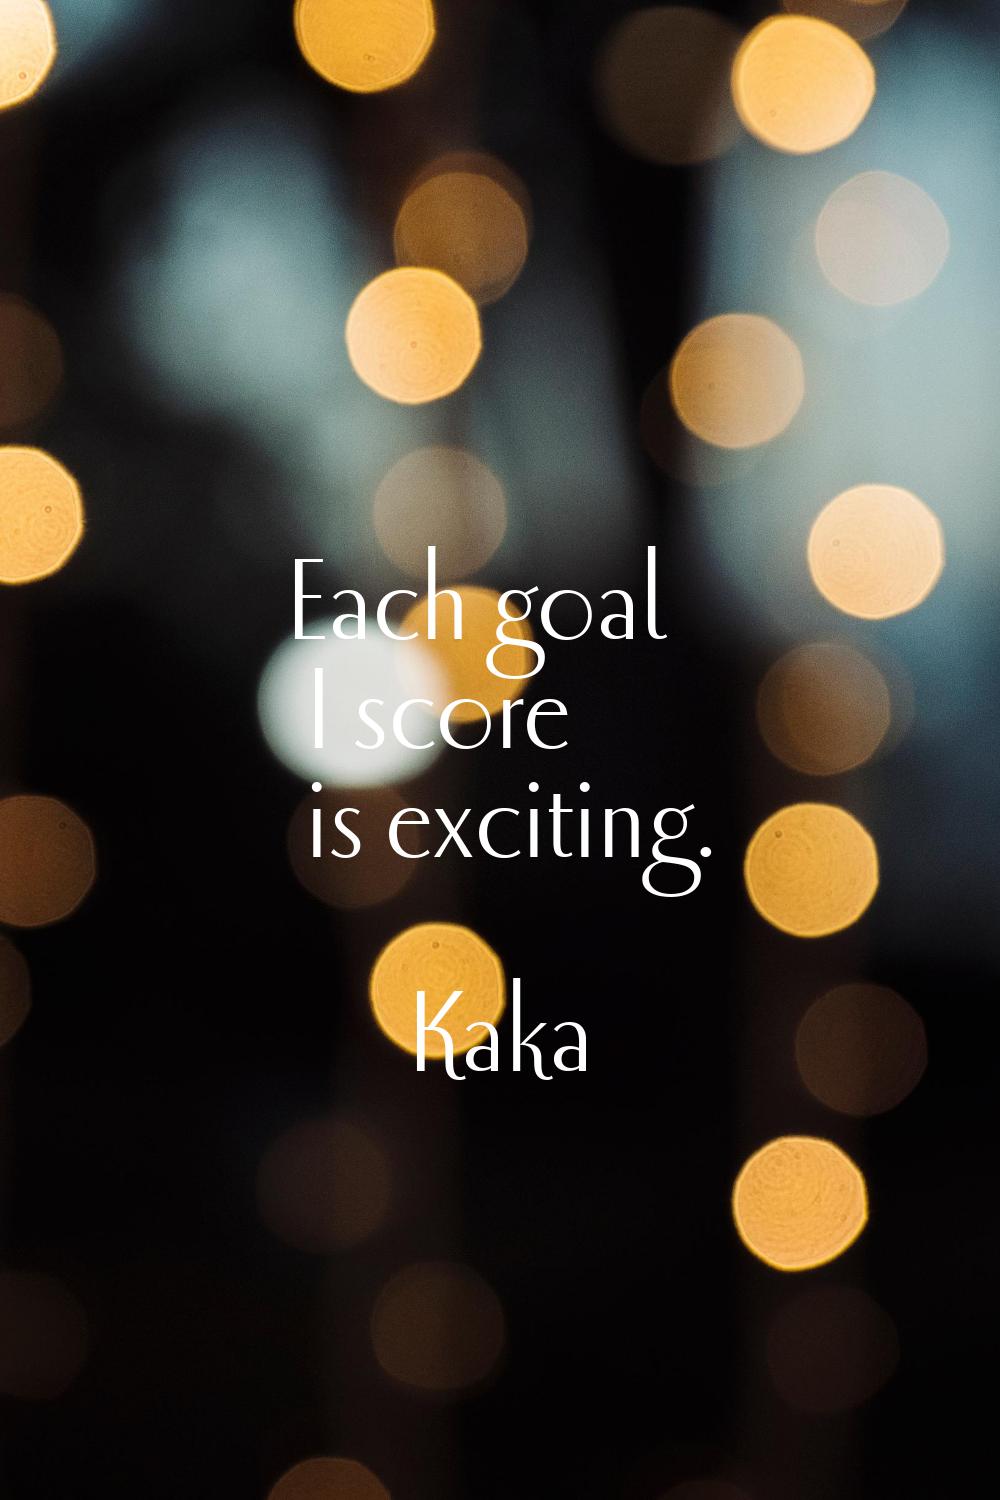 Each goal I score is exciting.